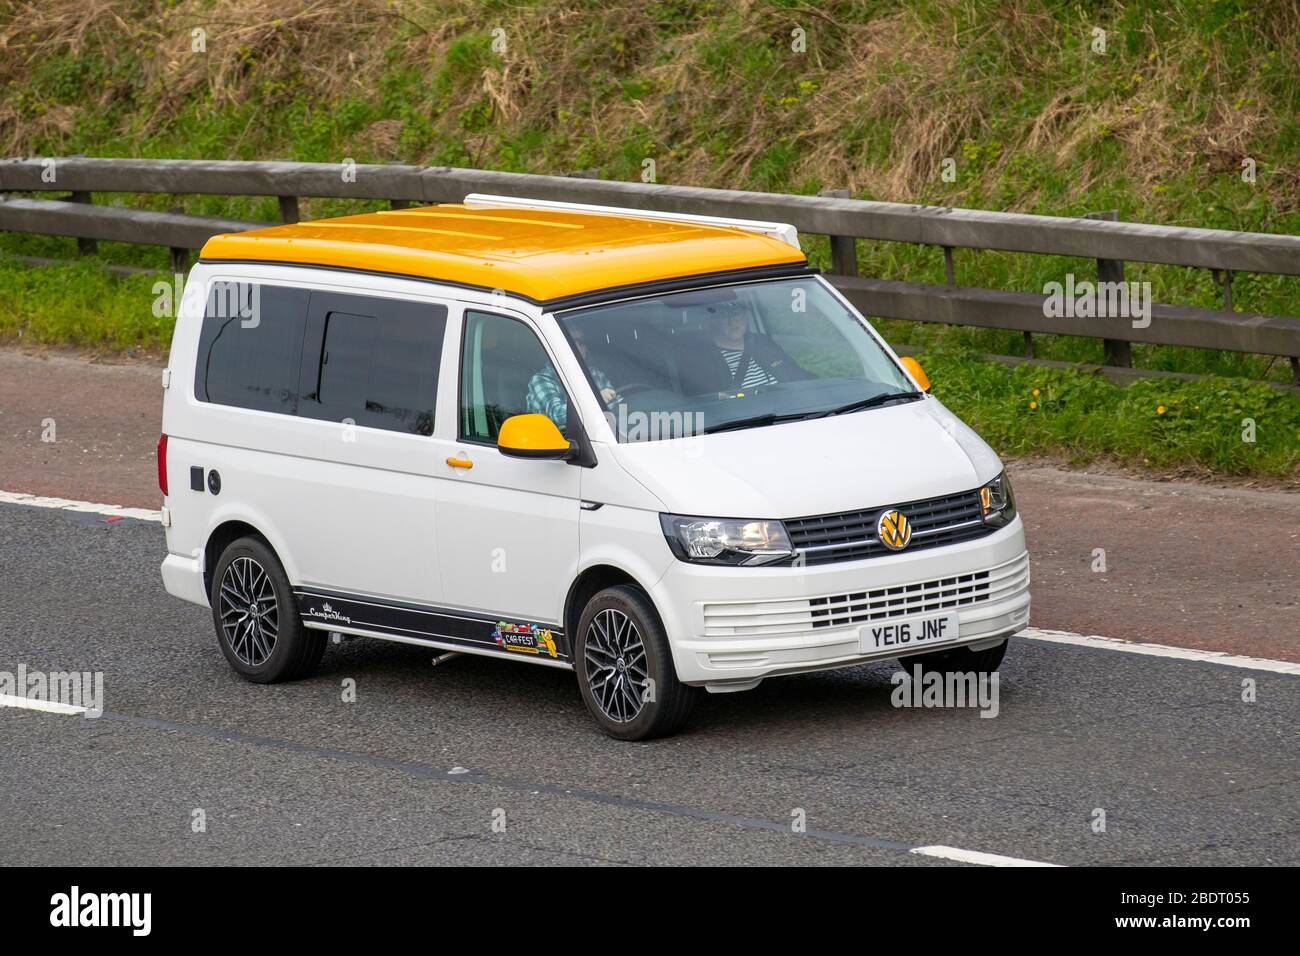 2016 white yellow Volkswagen Transporter T28 S-Line TD; Touring Caravans and Motorhomes, campervans, RV leisure vehicle, family holidays, caravanette vacations, caravan holiday, life on the road, Stock Photo